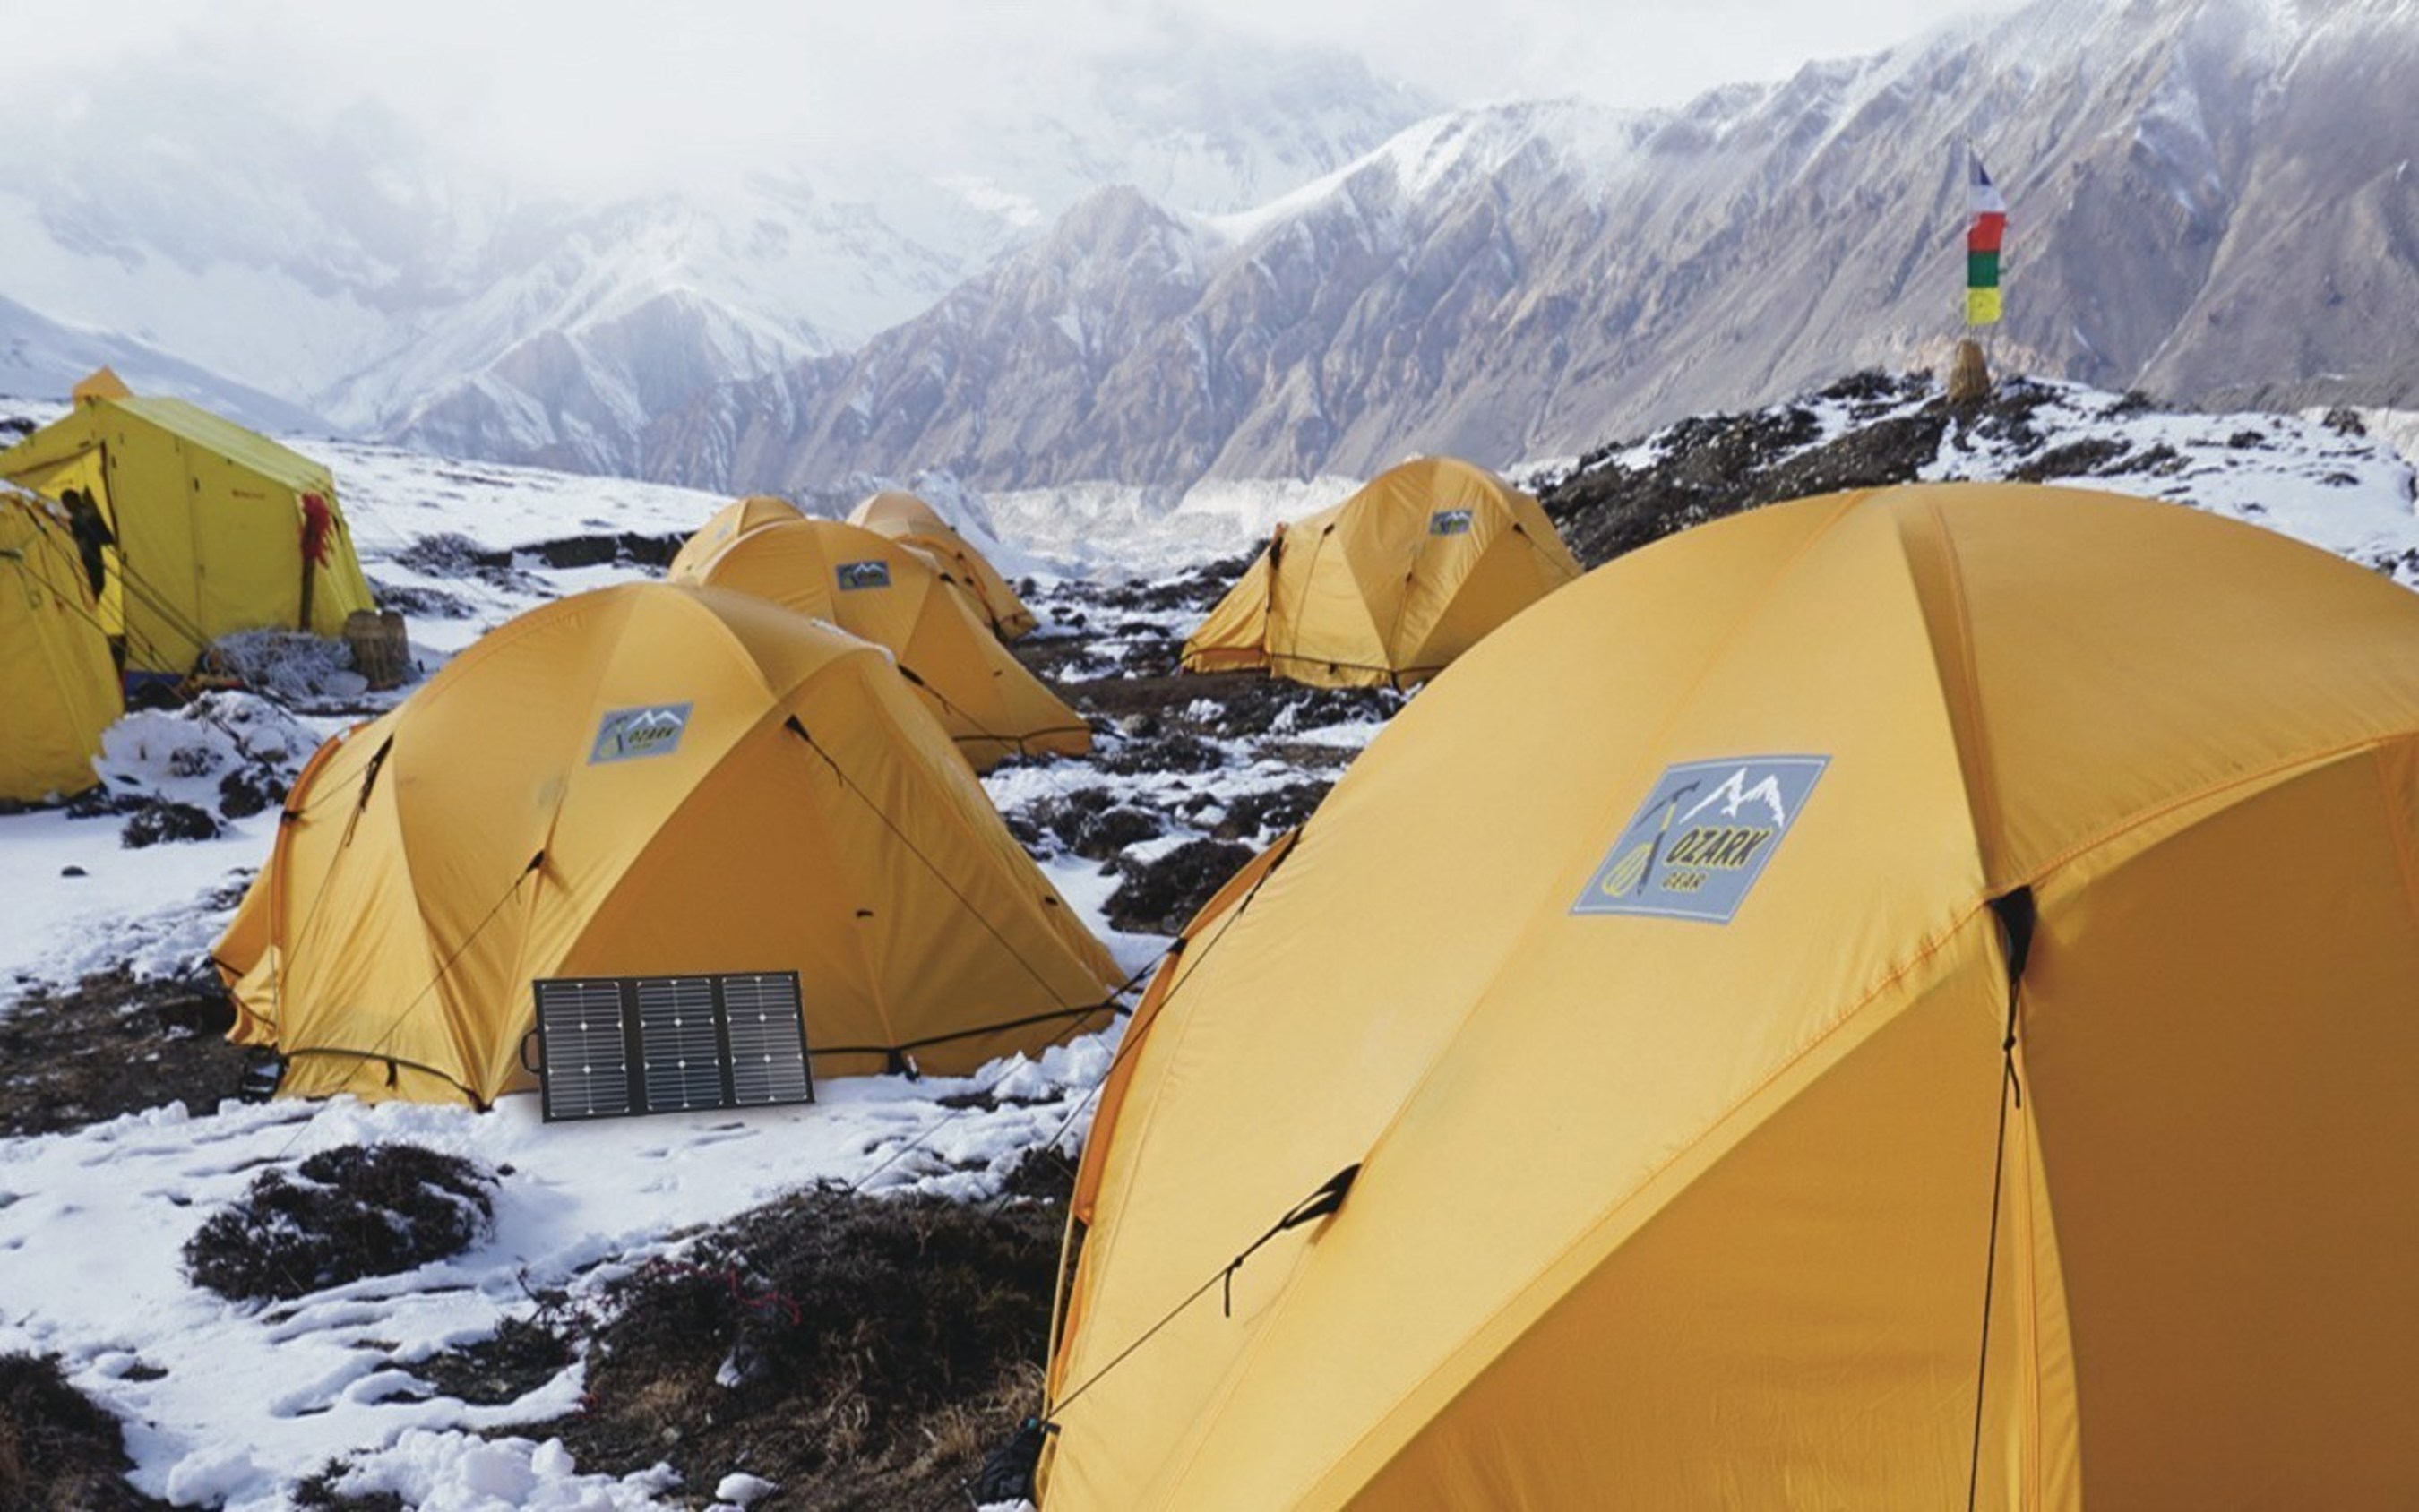 AspectSolar's energy products to be used to aid relief efforts in Nepal.